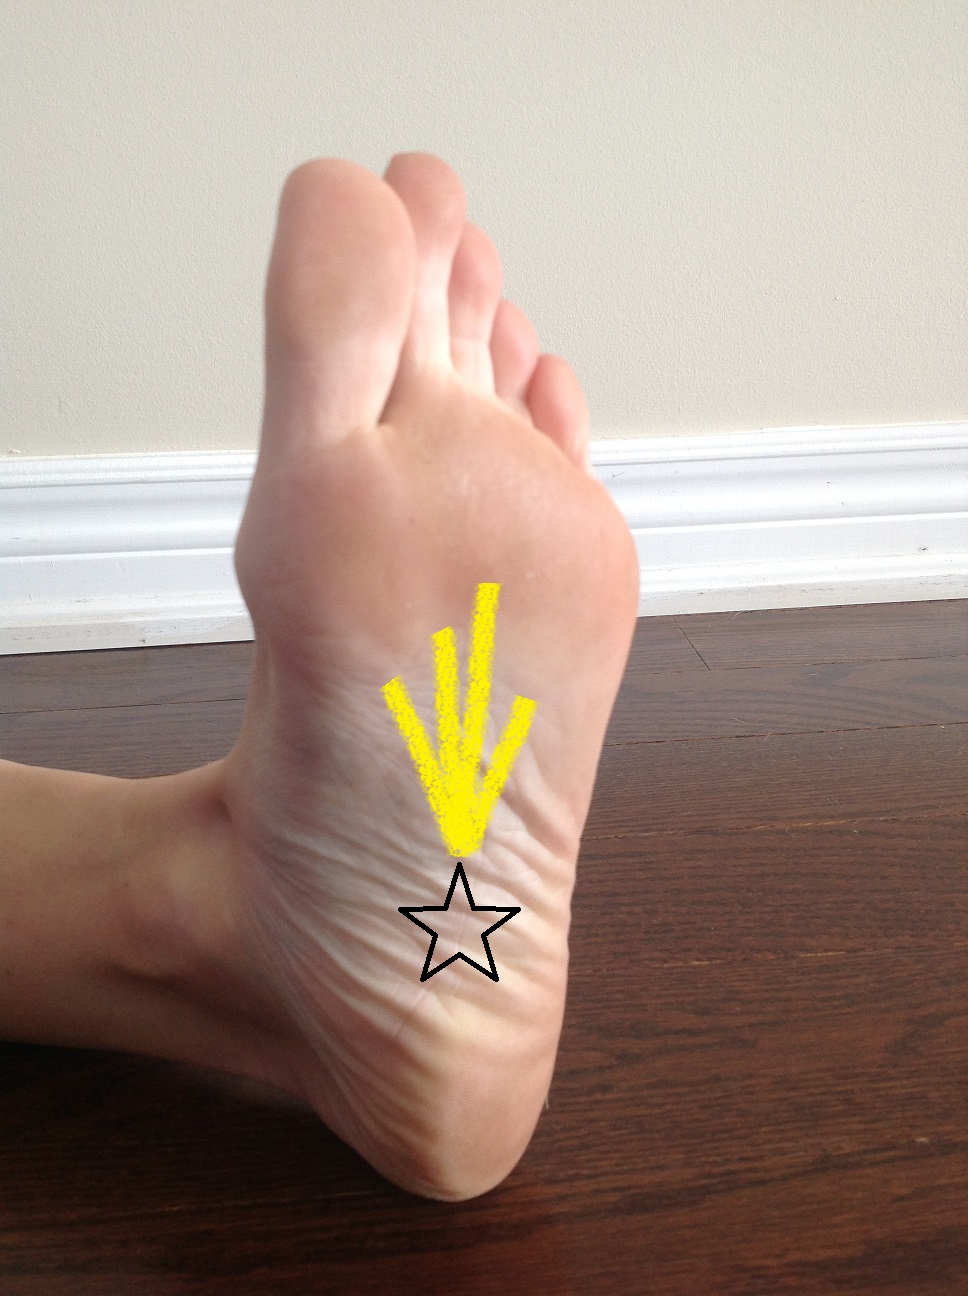 Plantar Fasciitis and Other Abnormalities of the Plantar Fascia